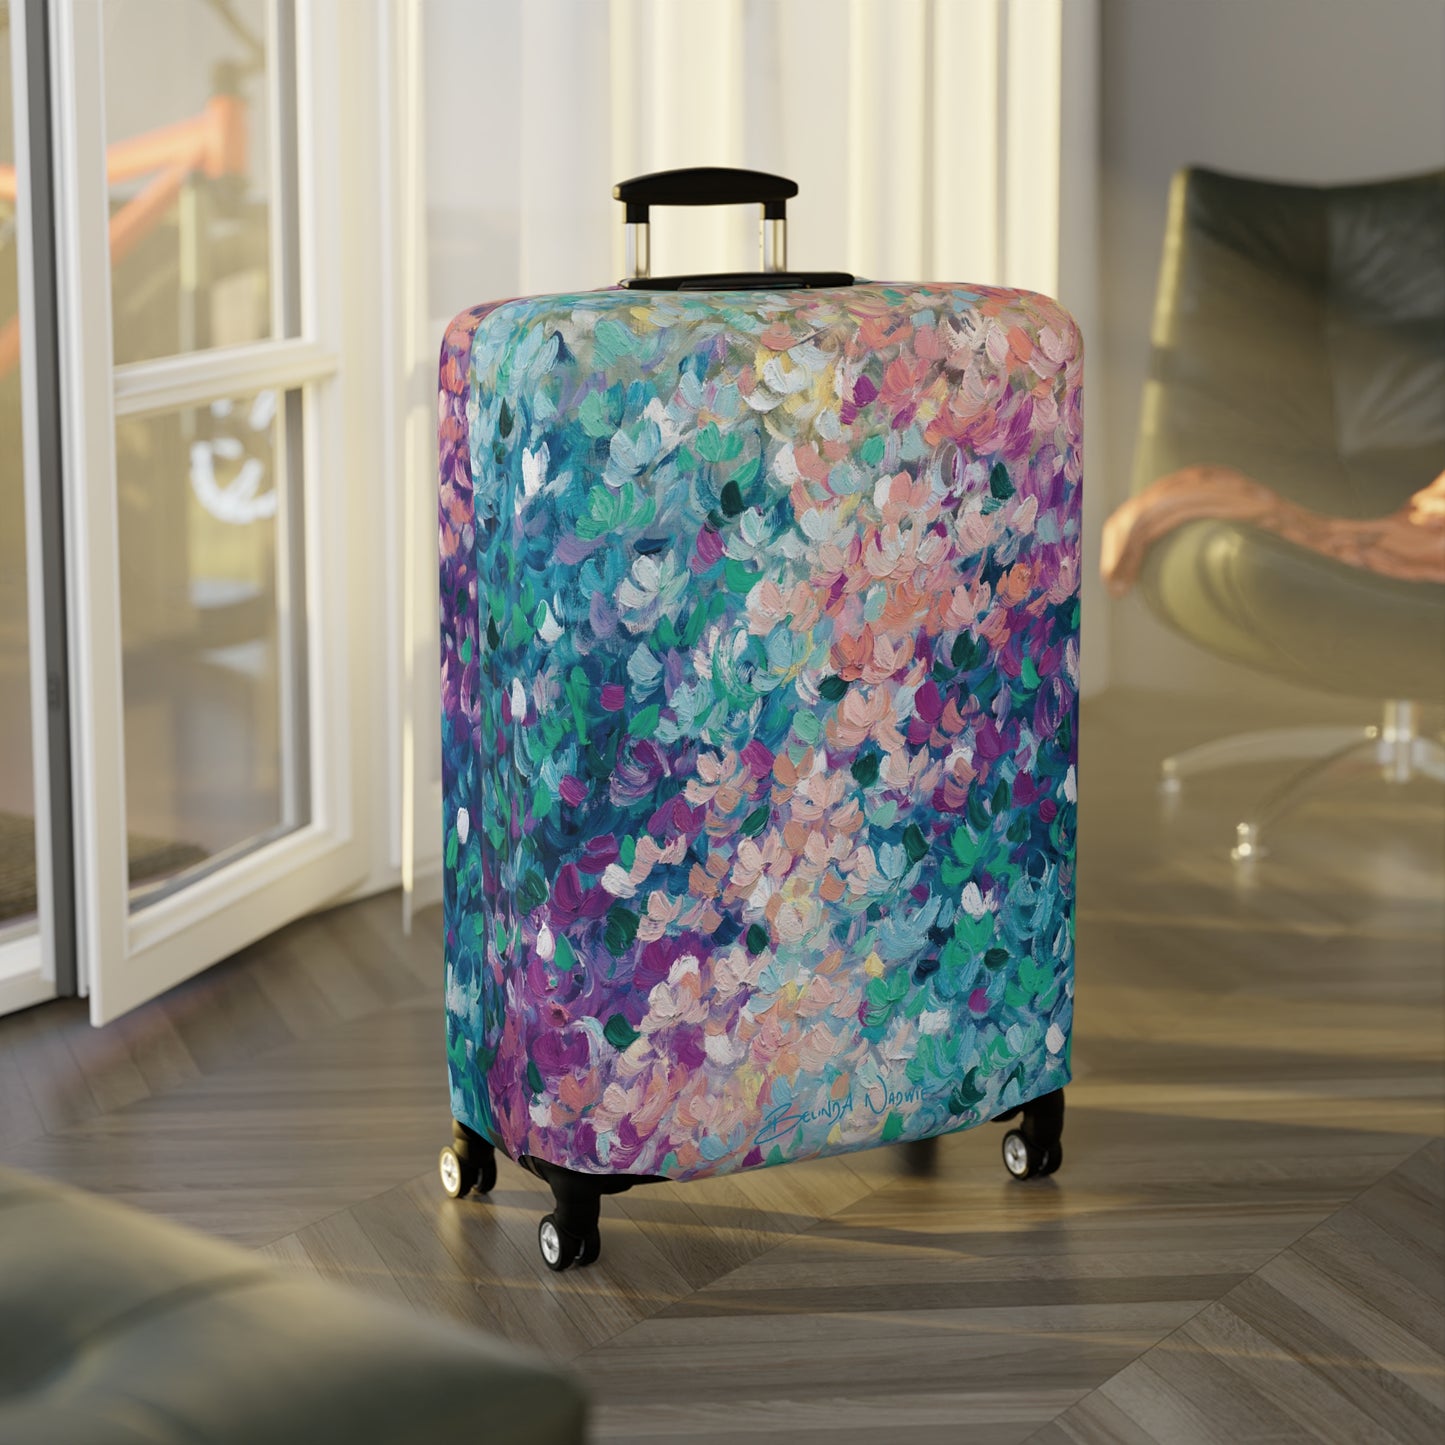 Alignment 2 Luggage Cover